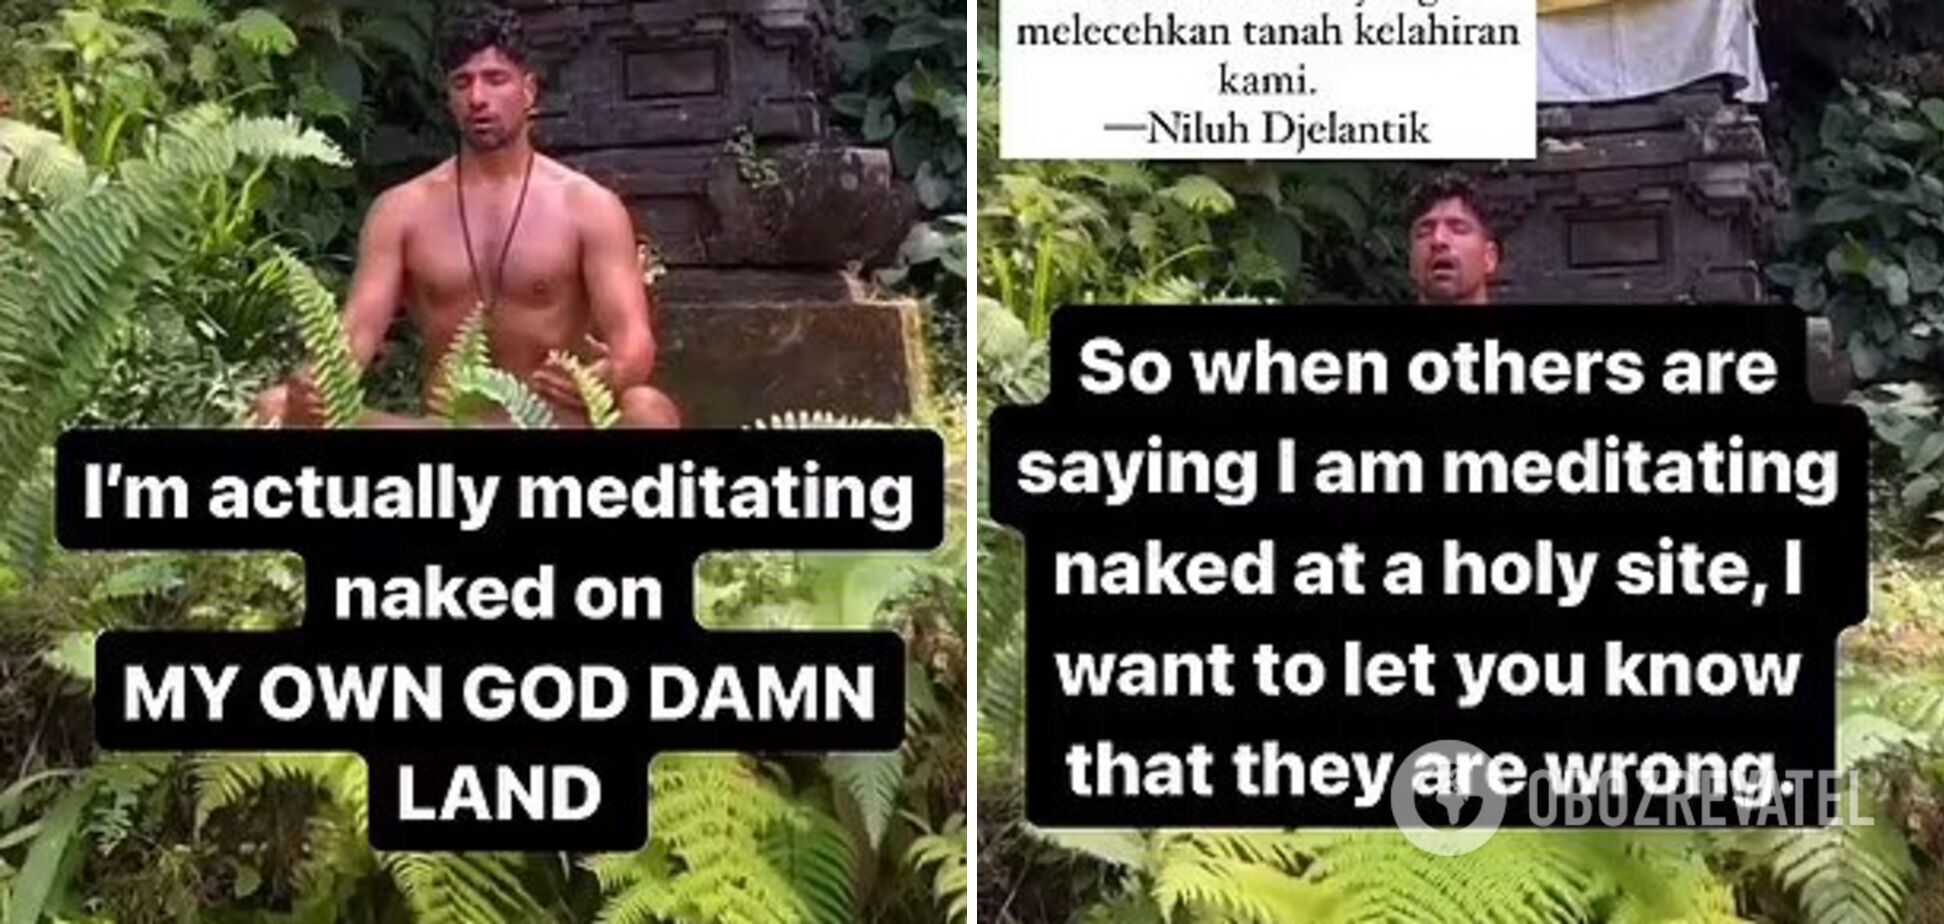 A tourist who meditated naked in a Hindu temple caused a stir in Bali. The video went viral